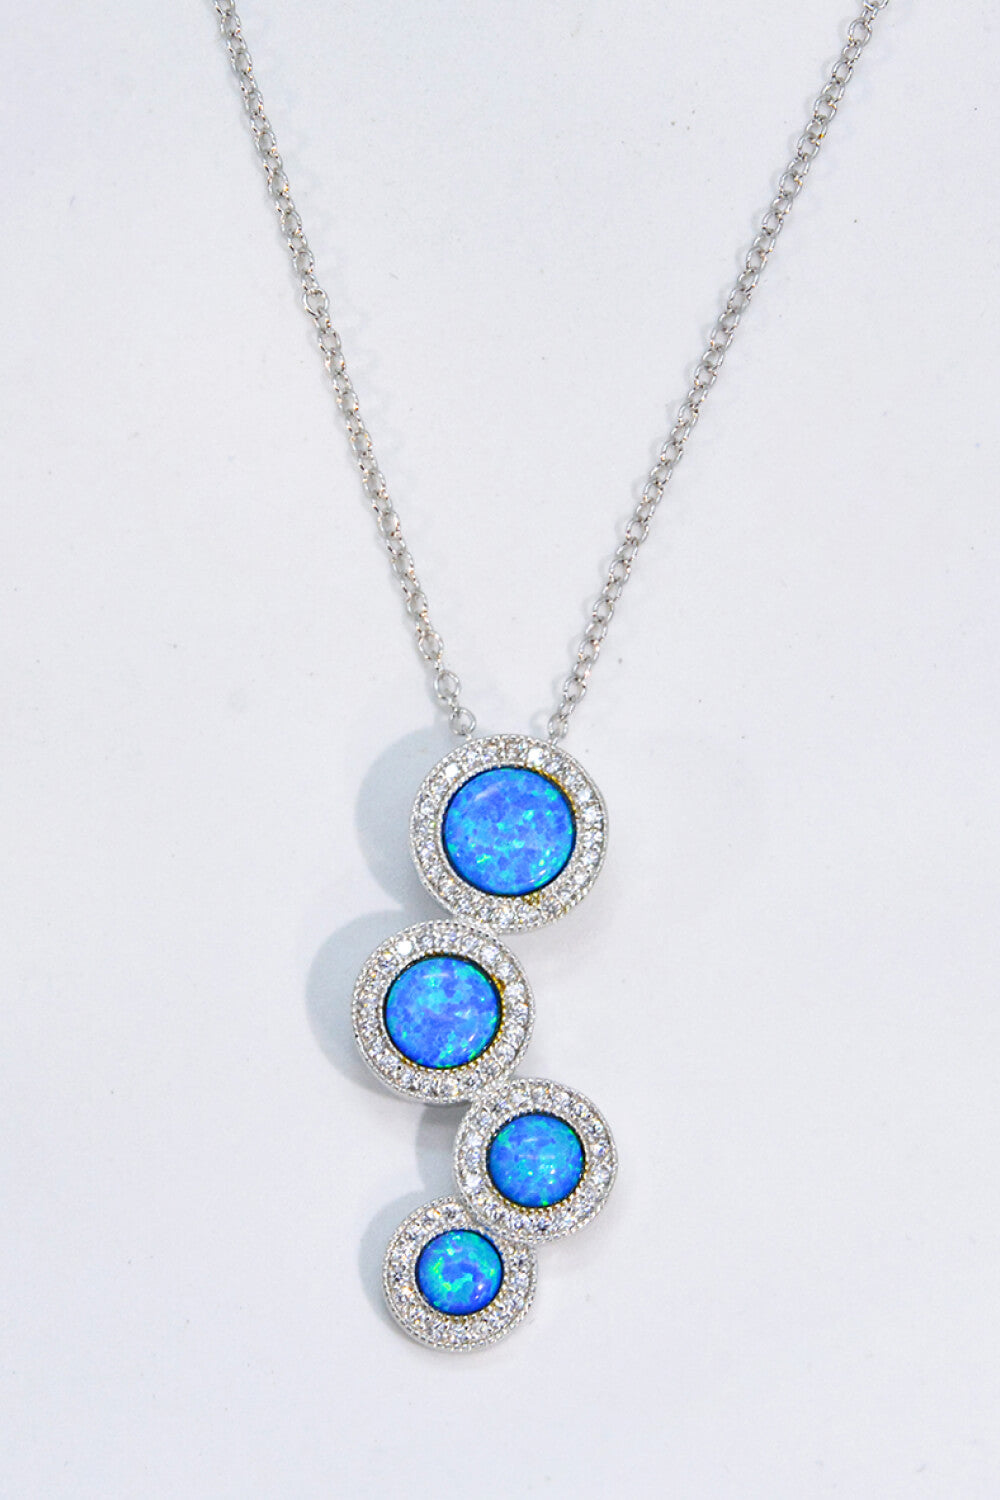 Opal Round Pendant Chain-Link Necklace-Necklaces-Inspired by Justeen-Women's Clothing Boutique in Chicago, Illinois